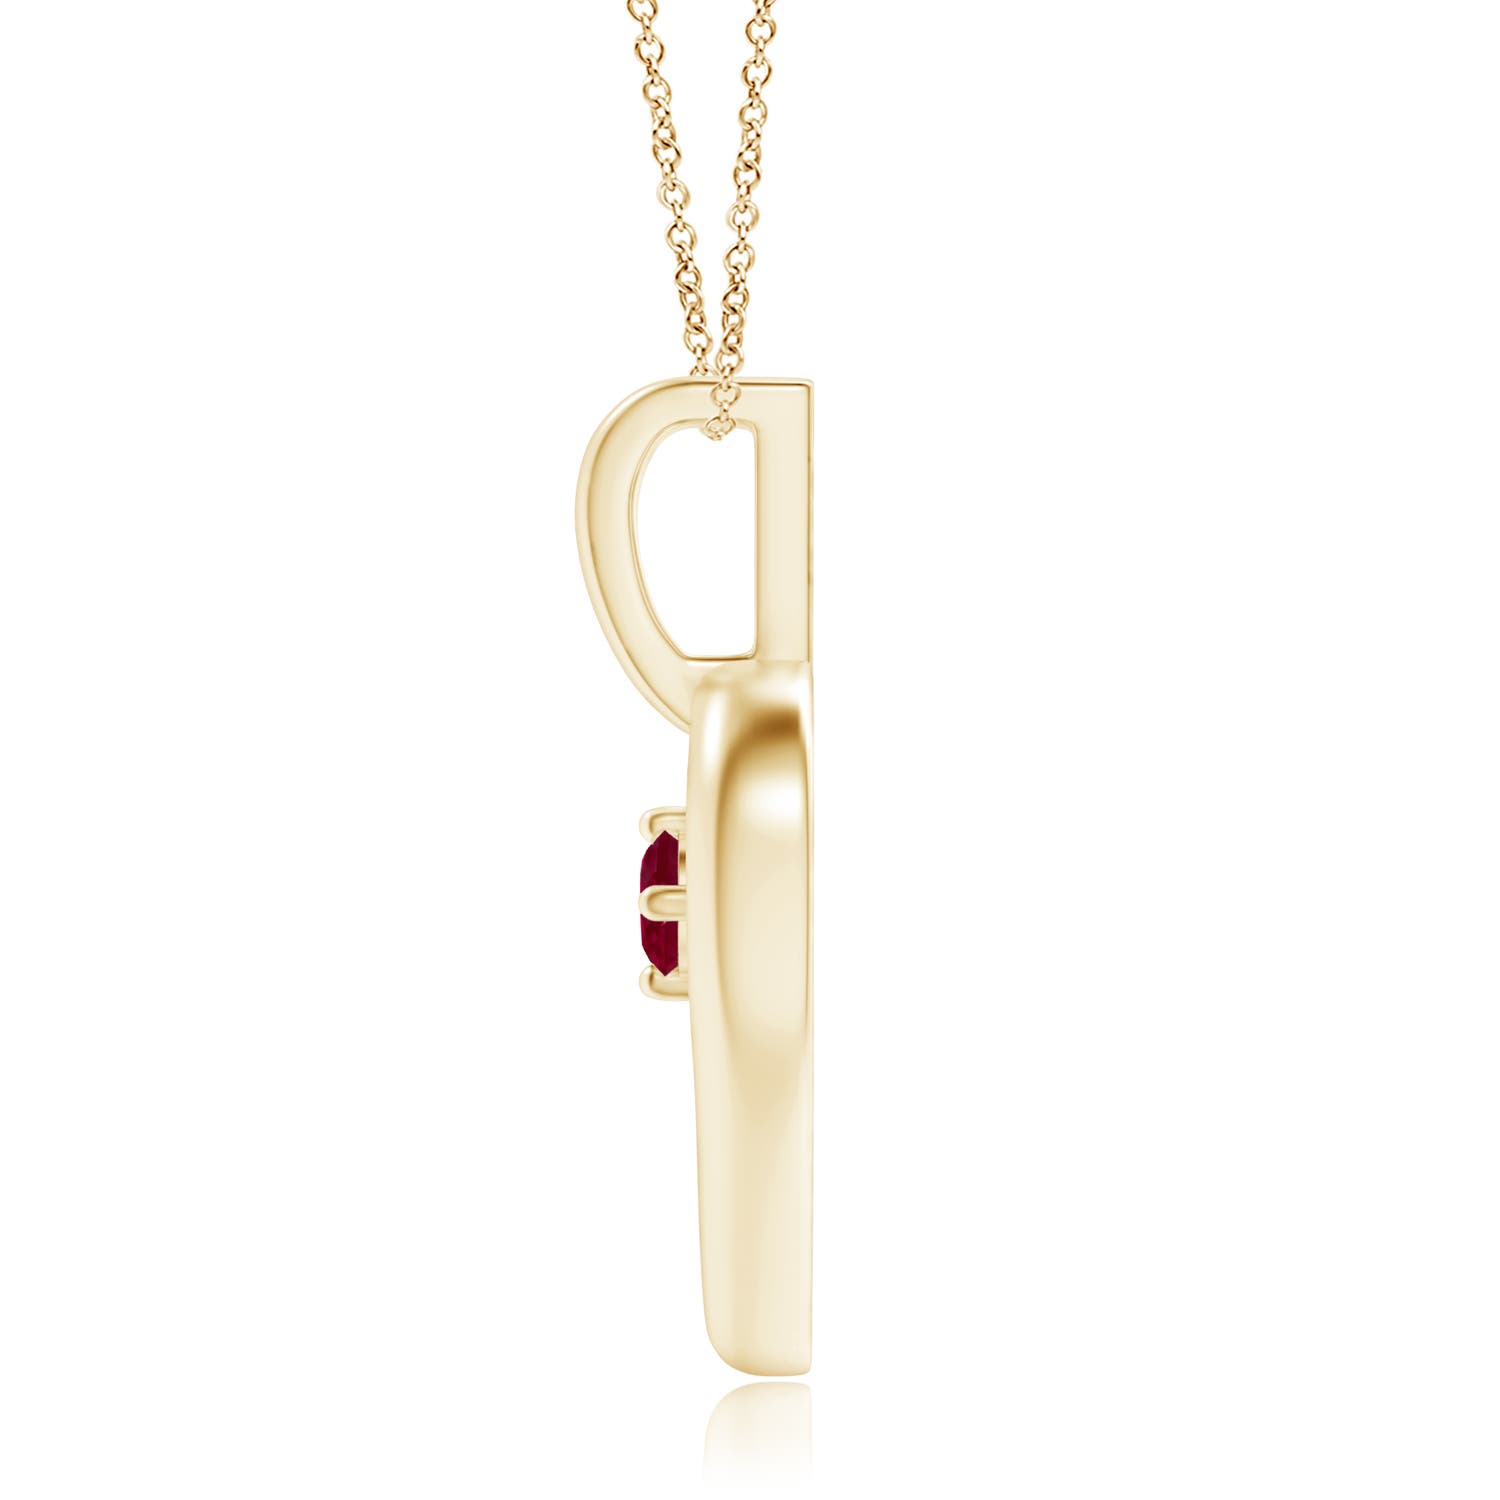 A - Ruby / 0.09 CT / 14 KT Yellow Gold